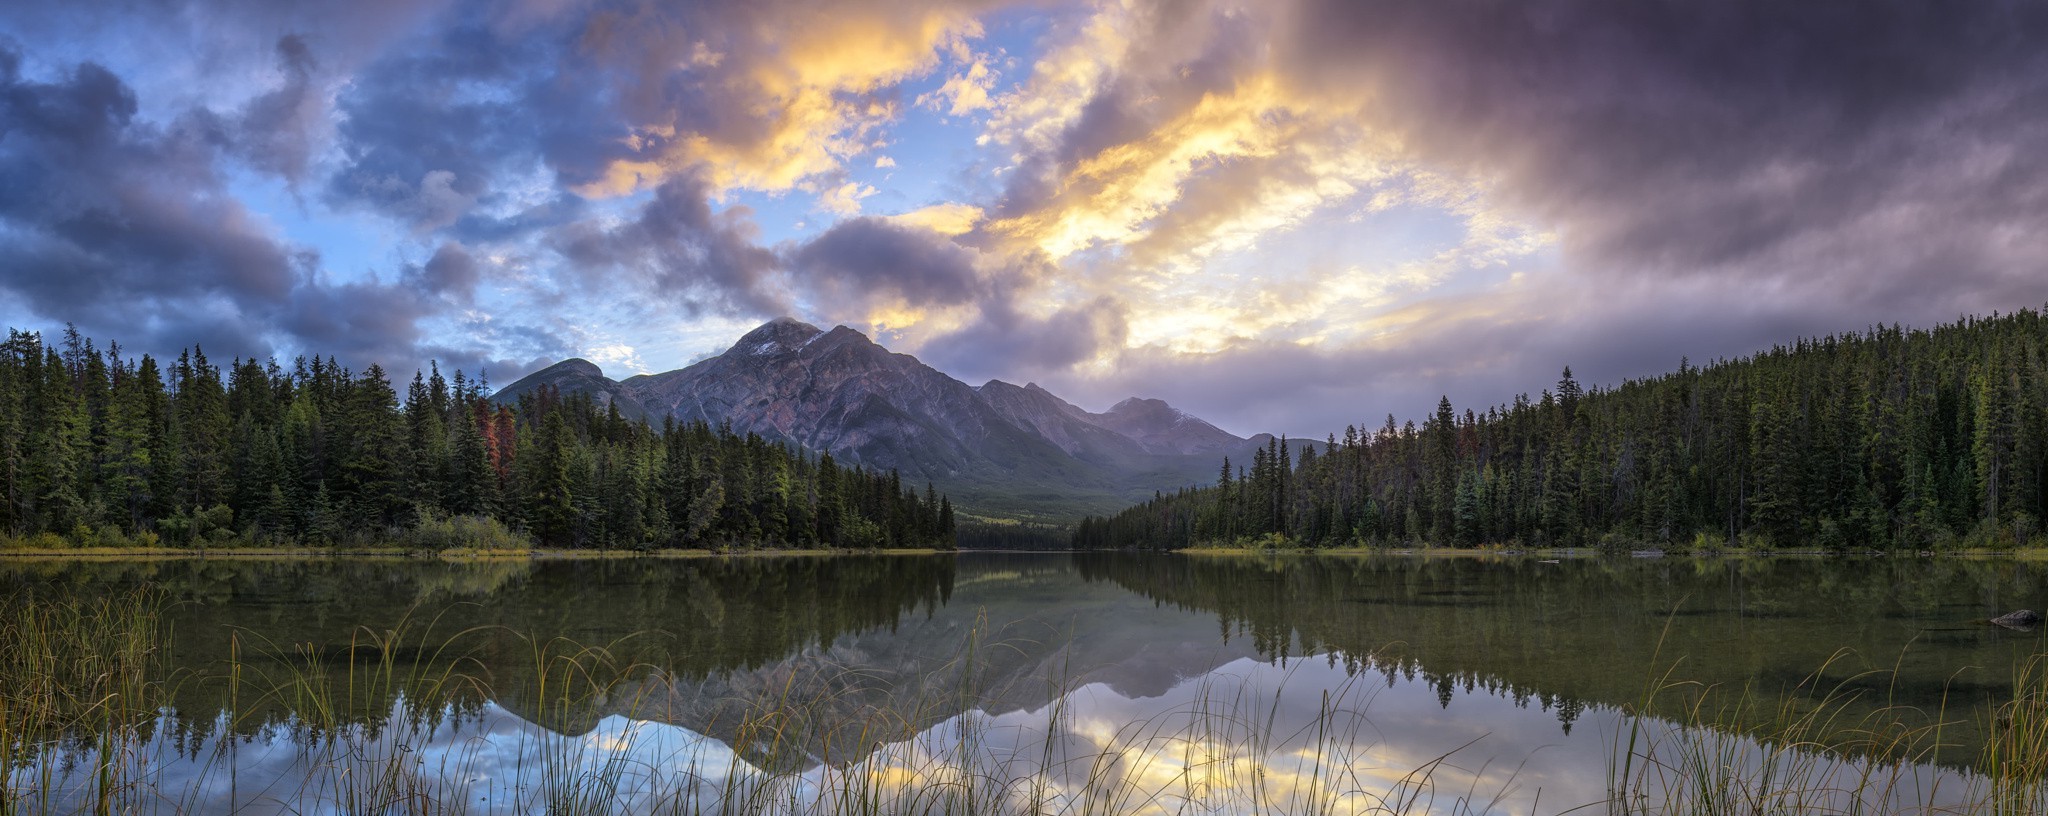 panoramas, Lake, Mountain, Nature, Sky, Jasper National Park, Canada, Landscape, Forest, Sunrise, Clouds, Trees, Reflection, Water Wallpaper